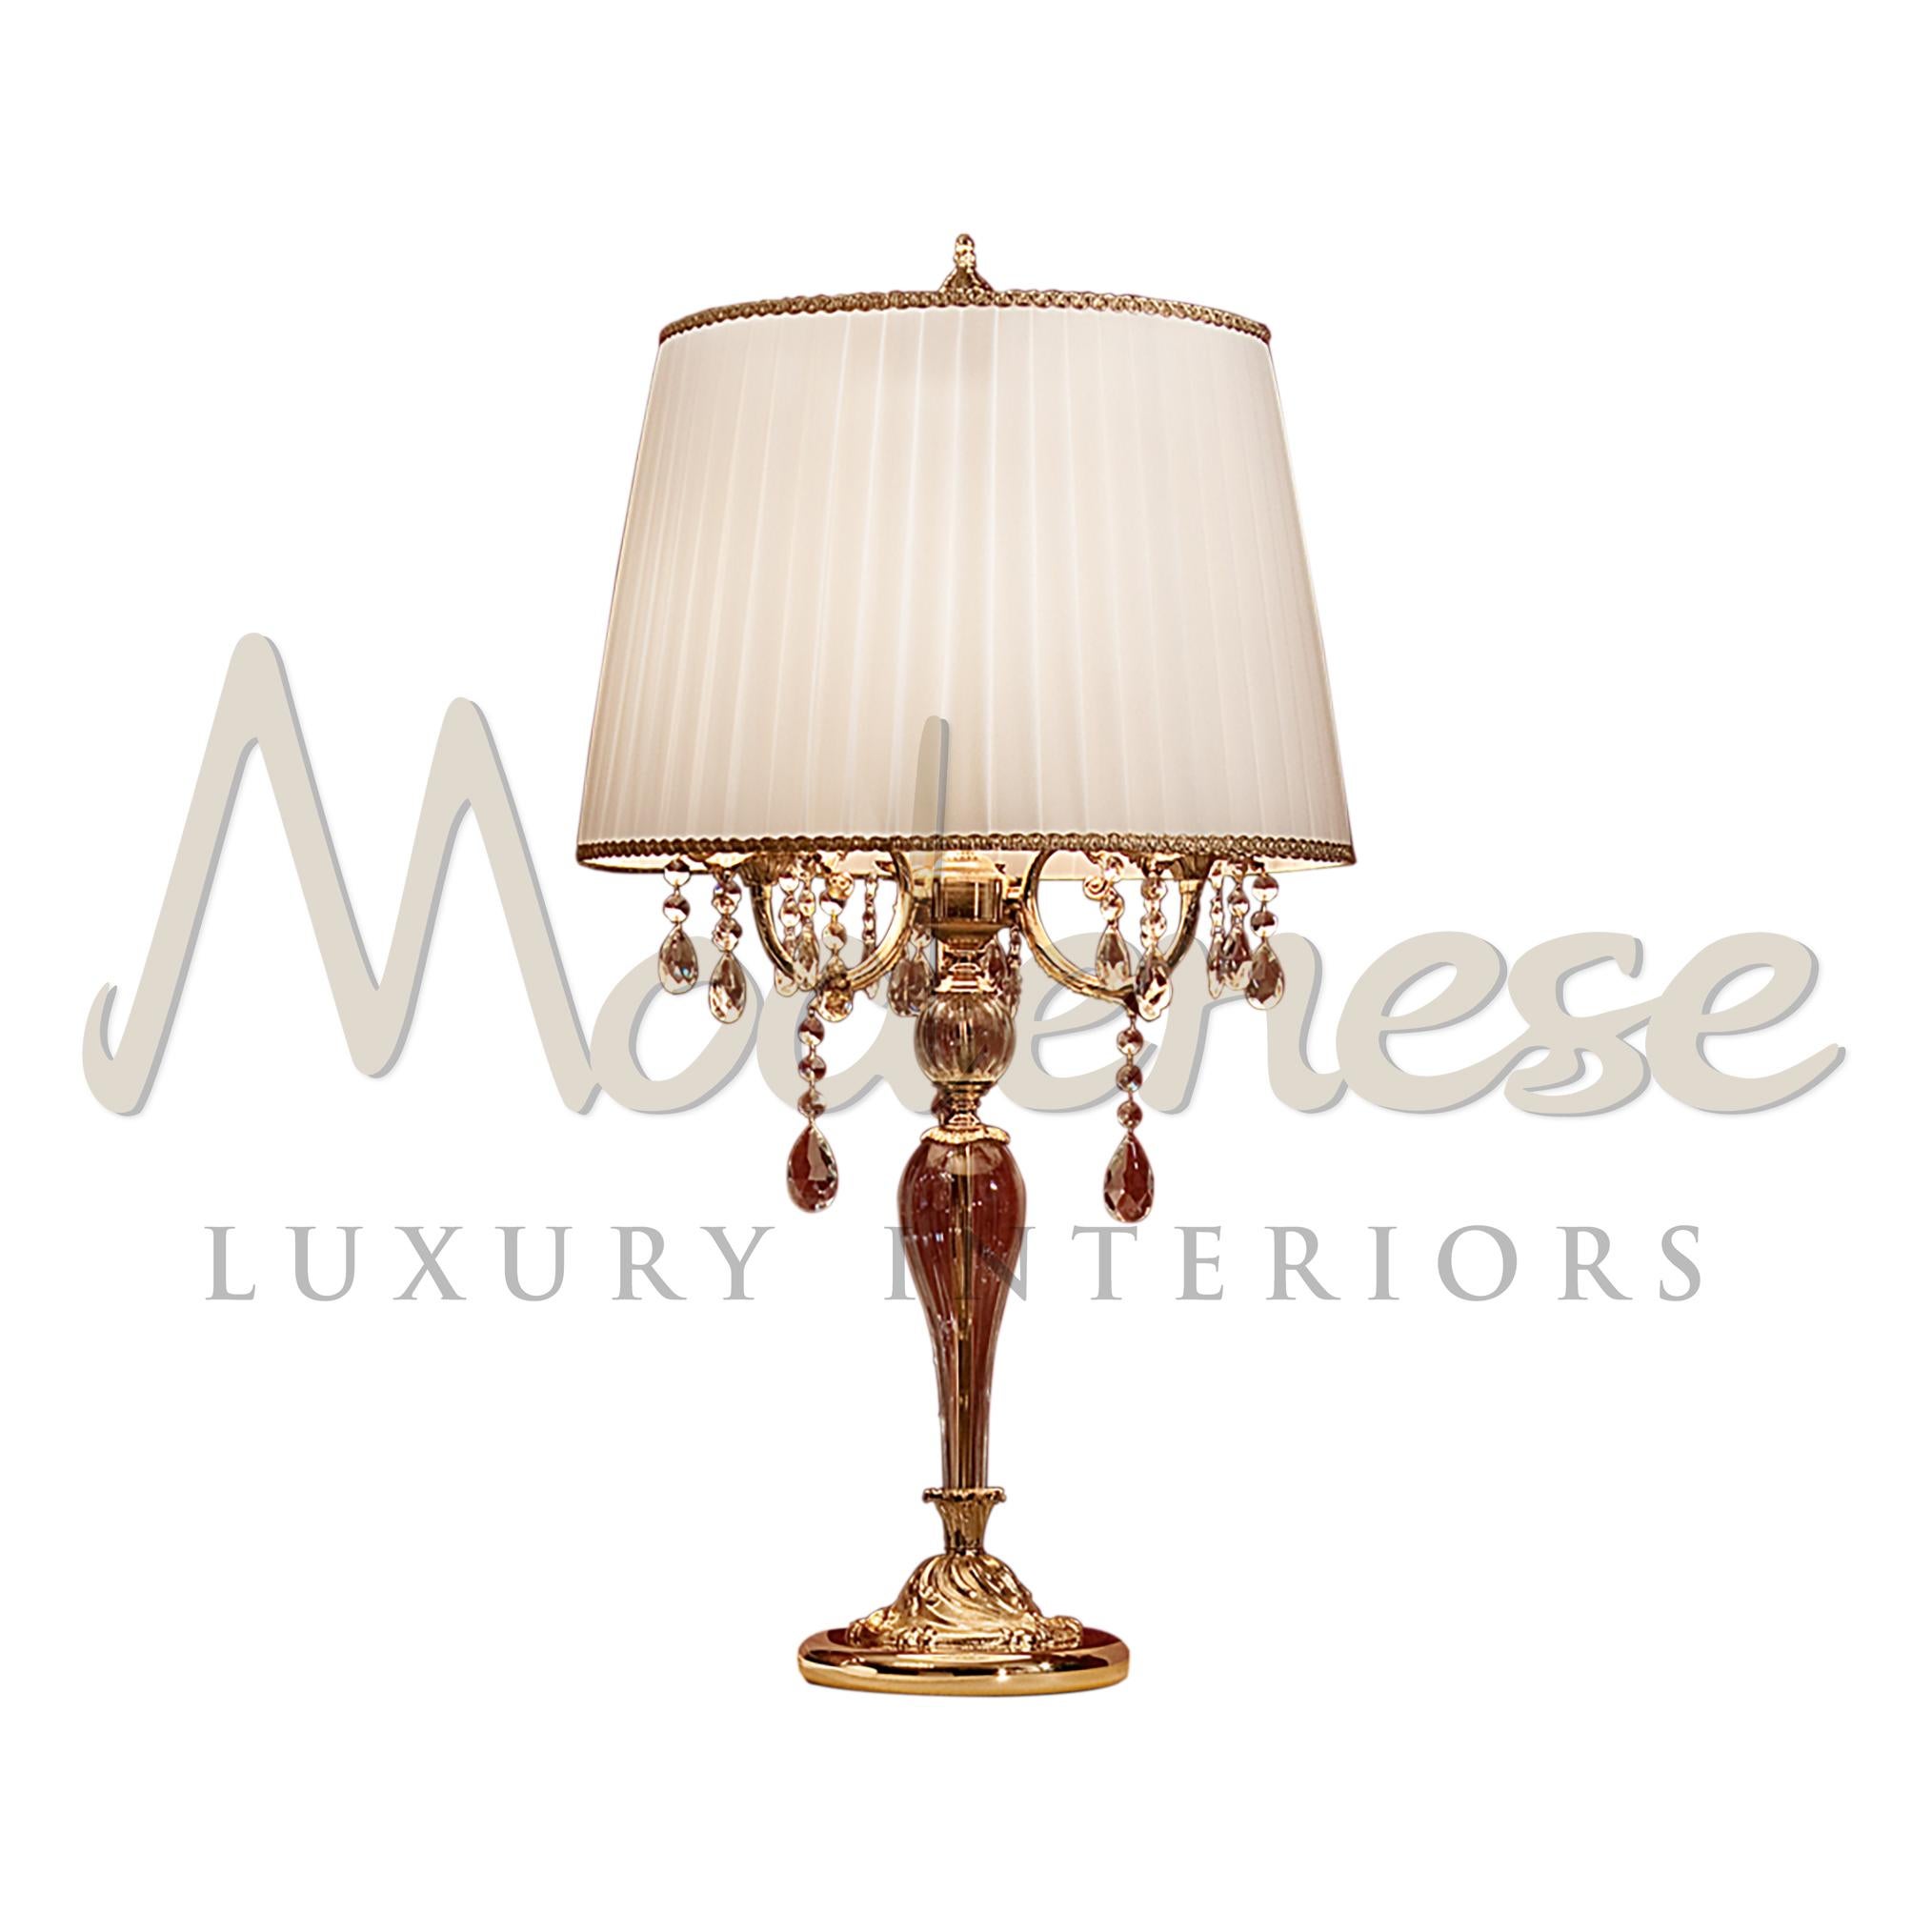 Designers from Modenese Luxury Interiors moulded this table lamp combining a 24kt antique gold plated structure, wounderful scholer crystal pendants and elegant fabrics. This model requires 3 single E14 screw fit light bulbs (60Watt max).